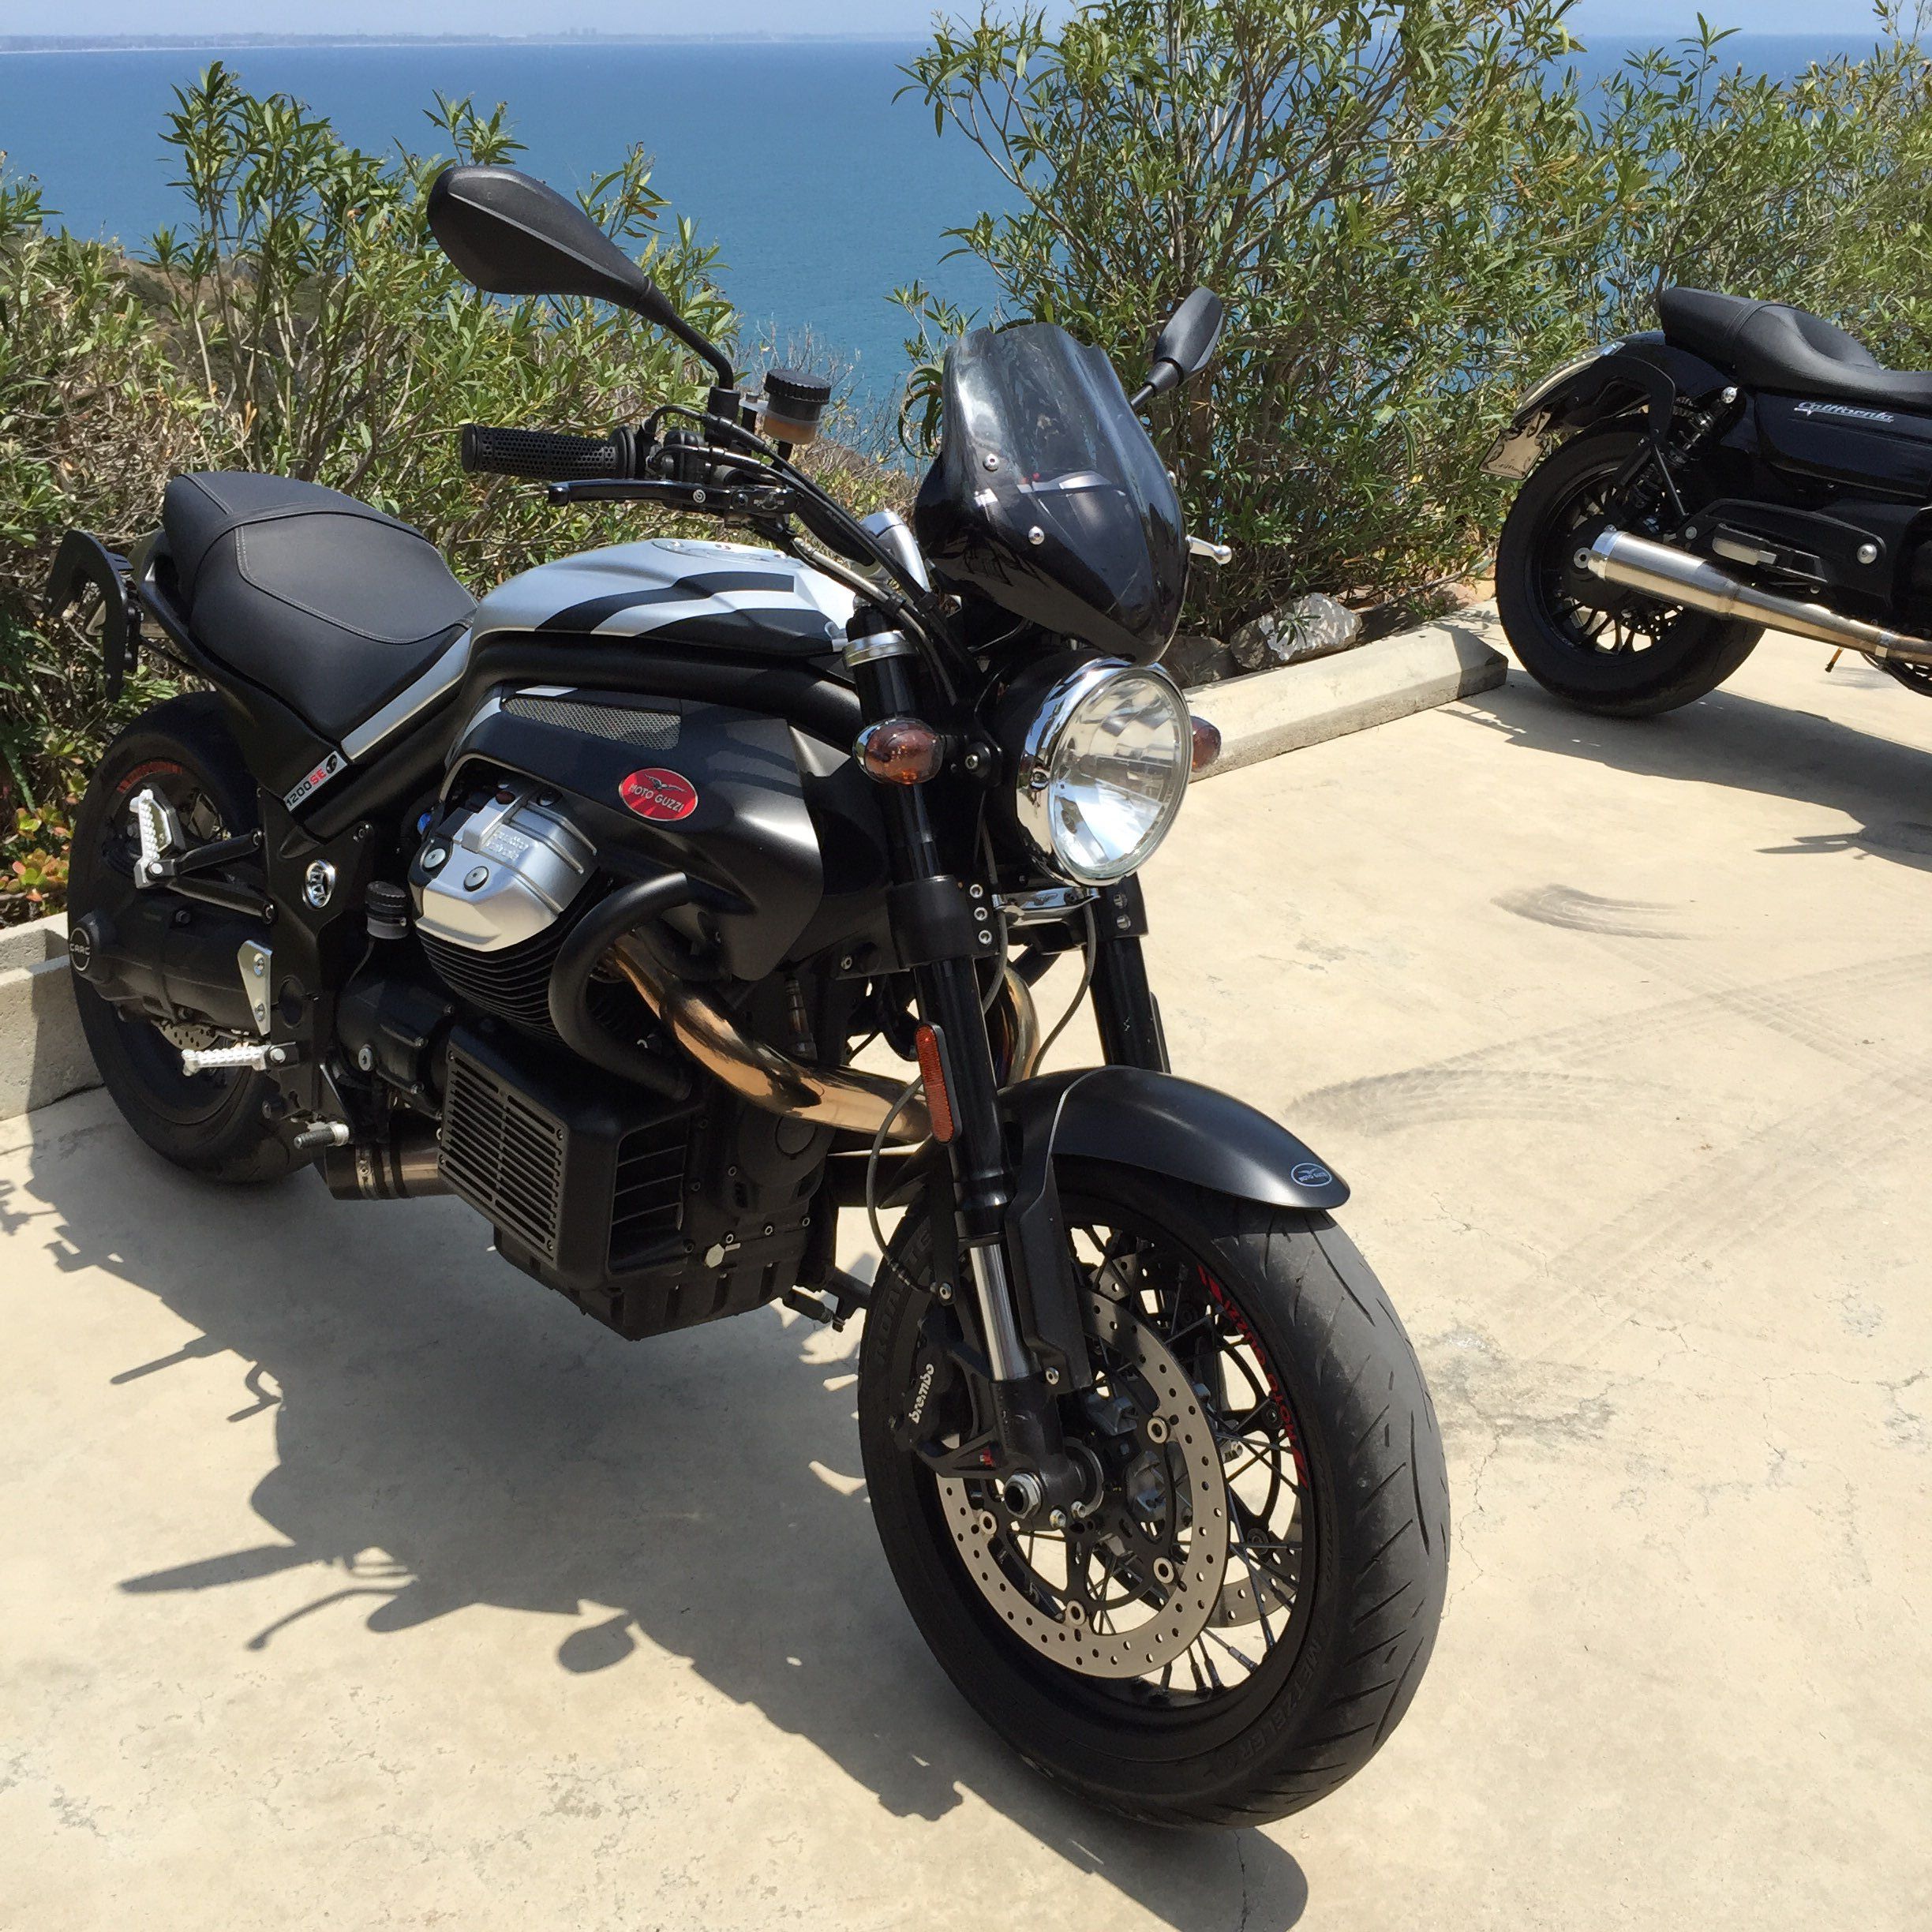 Moto Guzzi Griso sounds awesome and looks damn good in the Hills